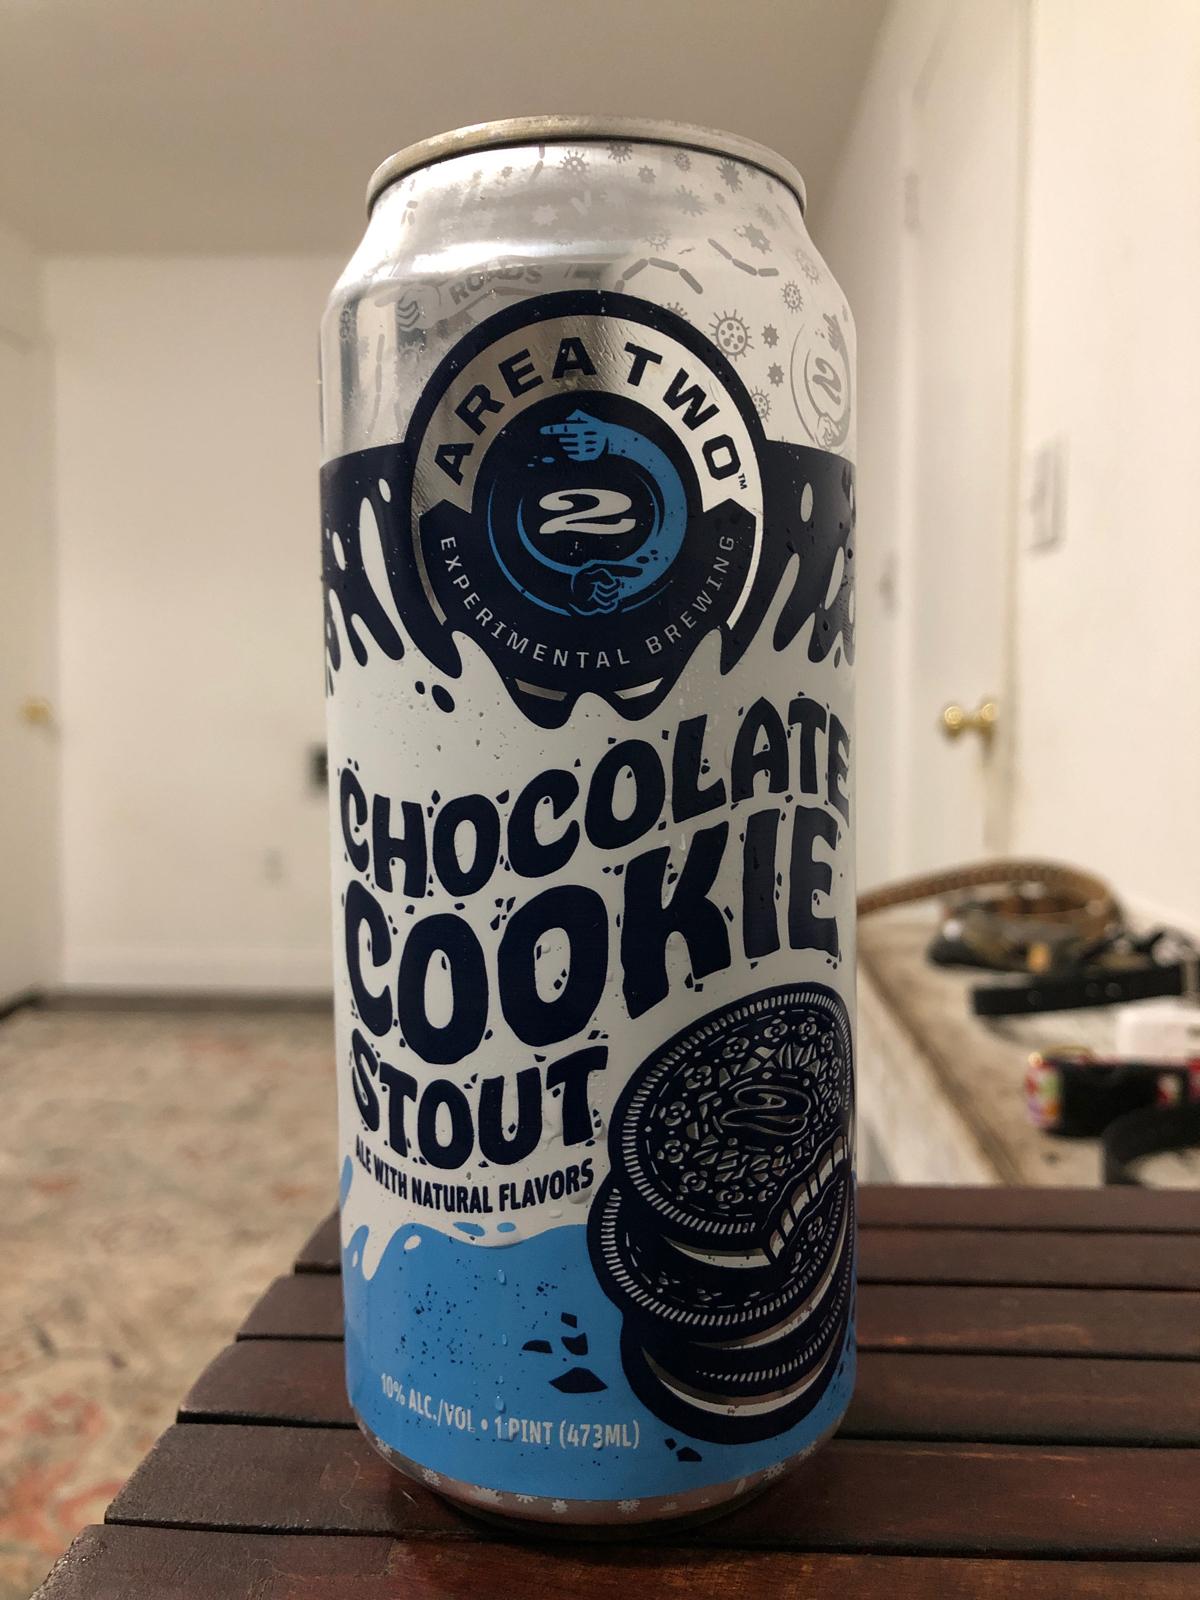 Chocolate Cookie Stout